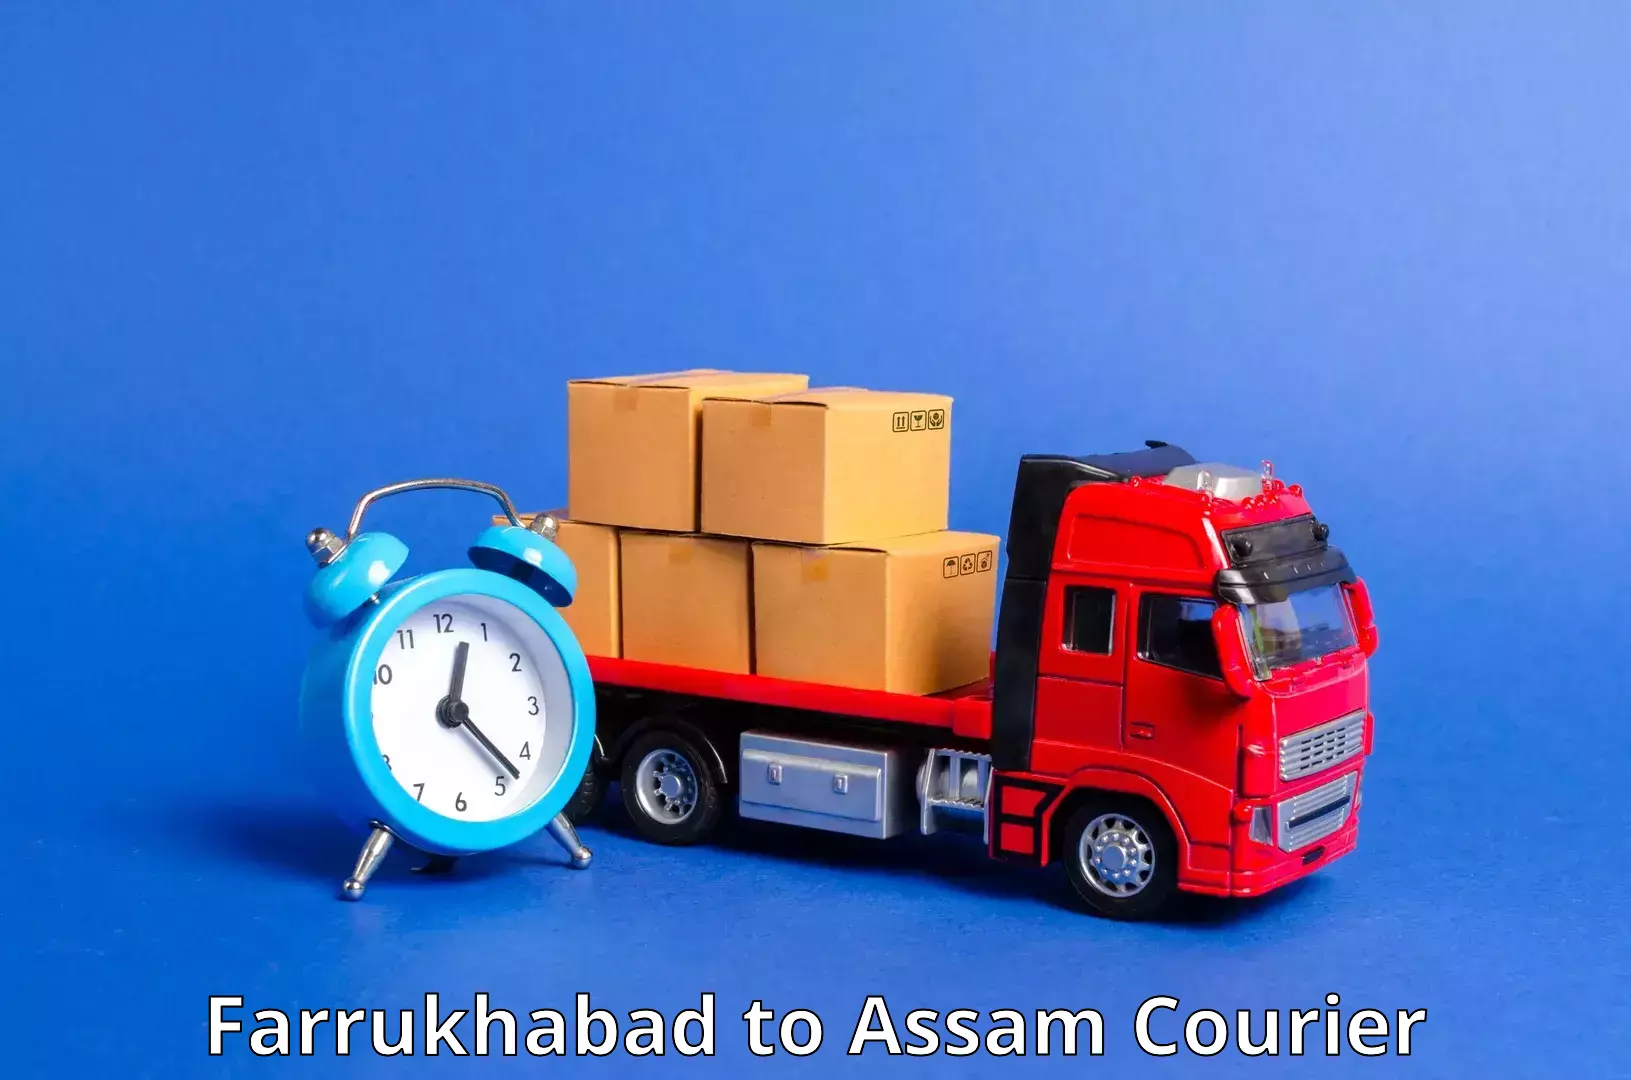 User-friendly delivery service Farrukhabad to Guwahati University